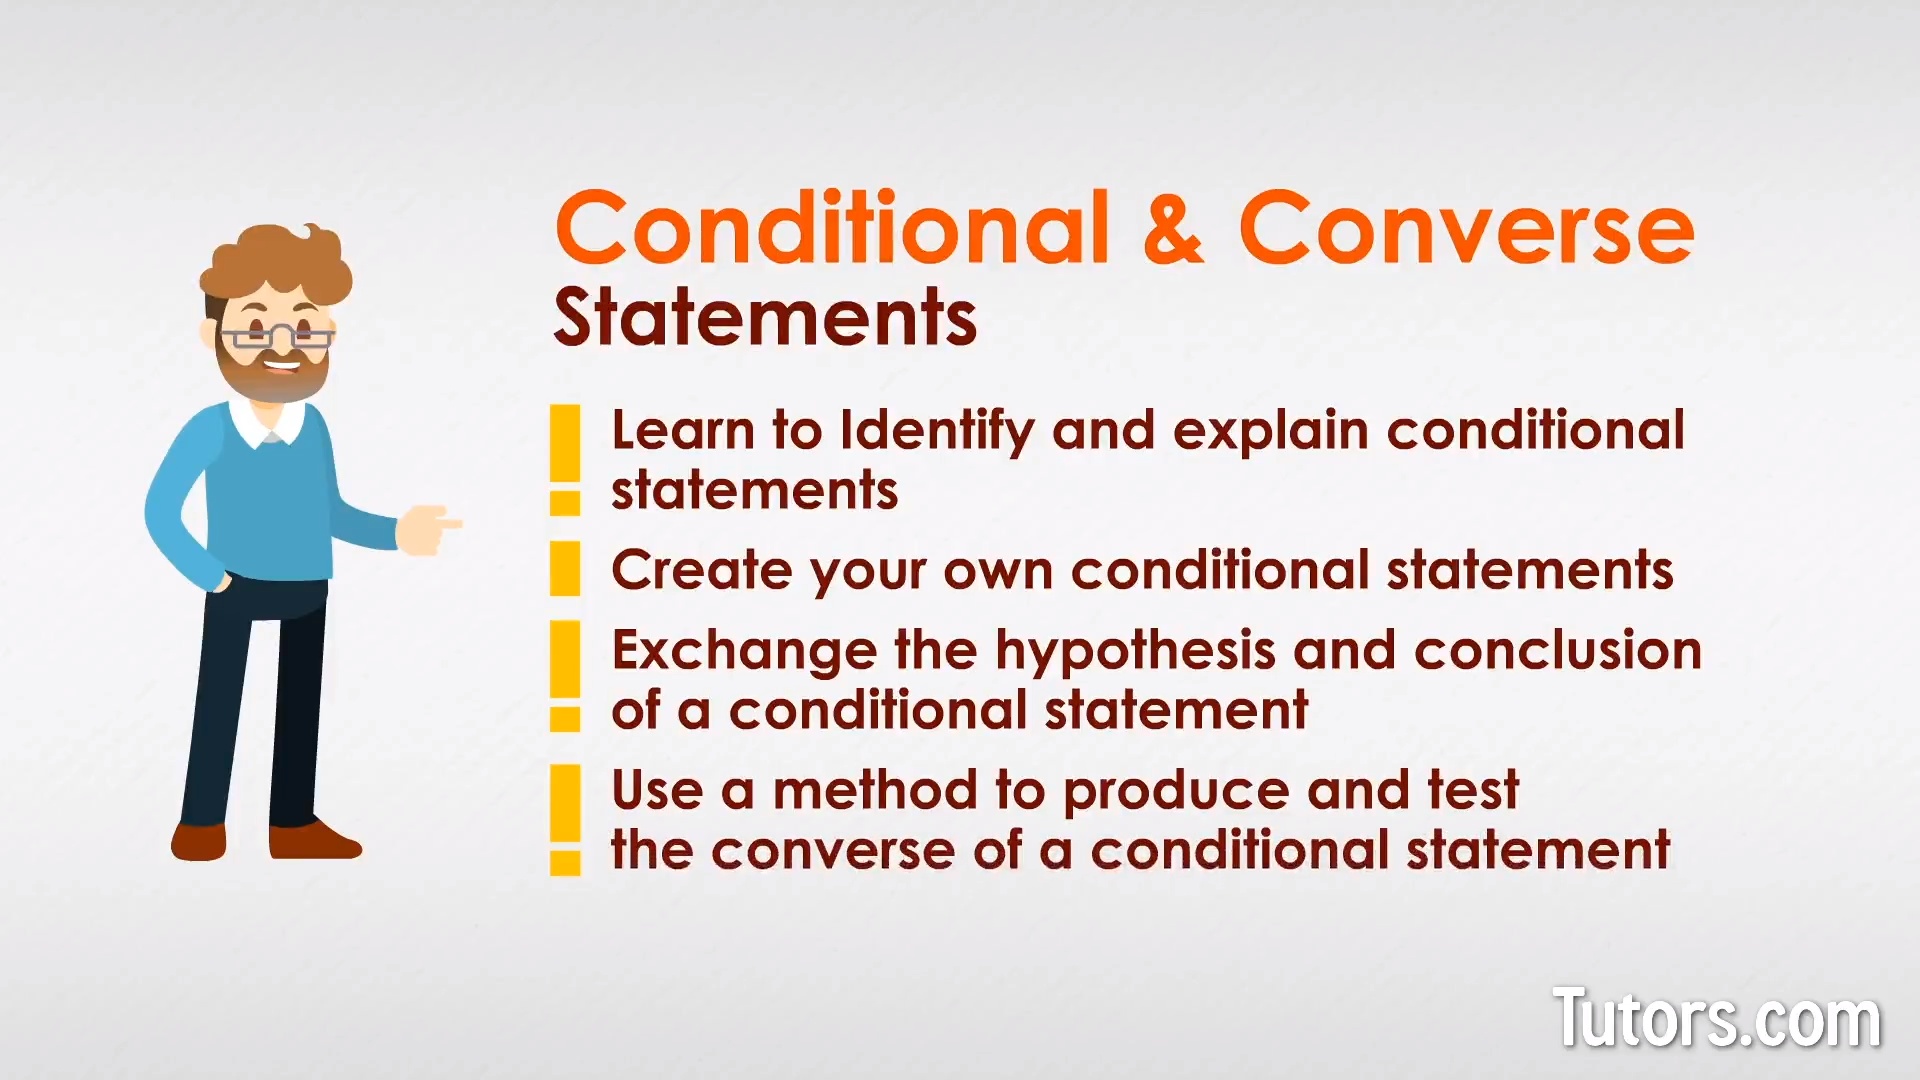 Conditional statements. Conditionals 2 3 упражнения. Converse of Statement. Converse meaning. Conversion examples.